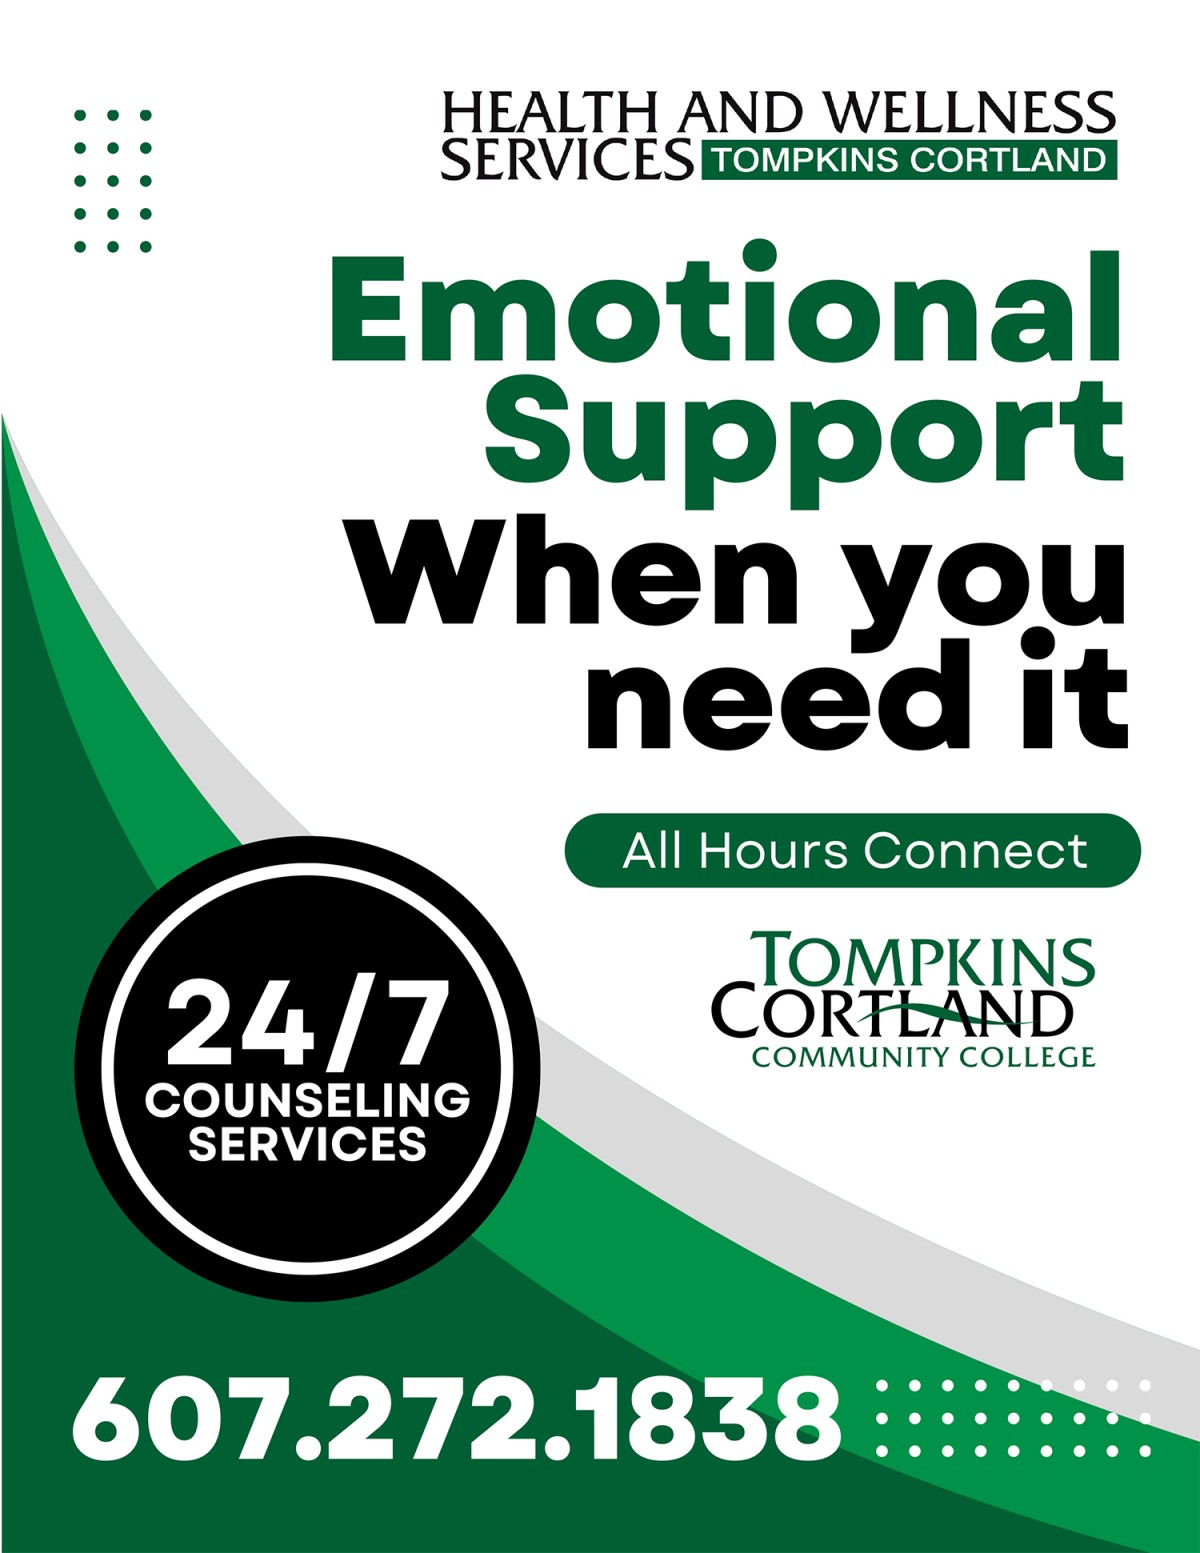 Emotional Support when you need it - All Hours Connect - 607.272.1838